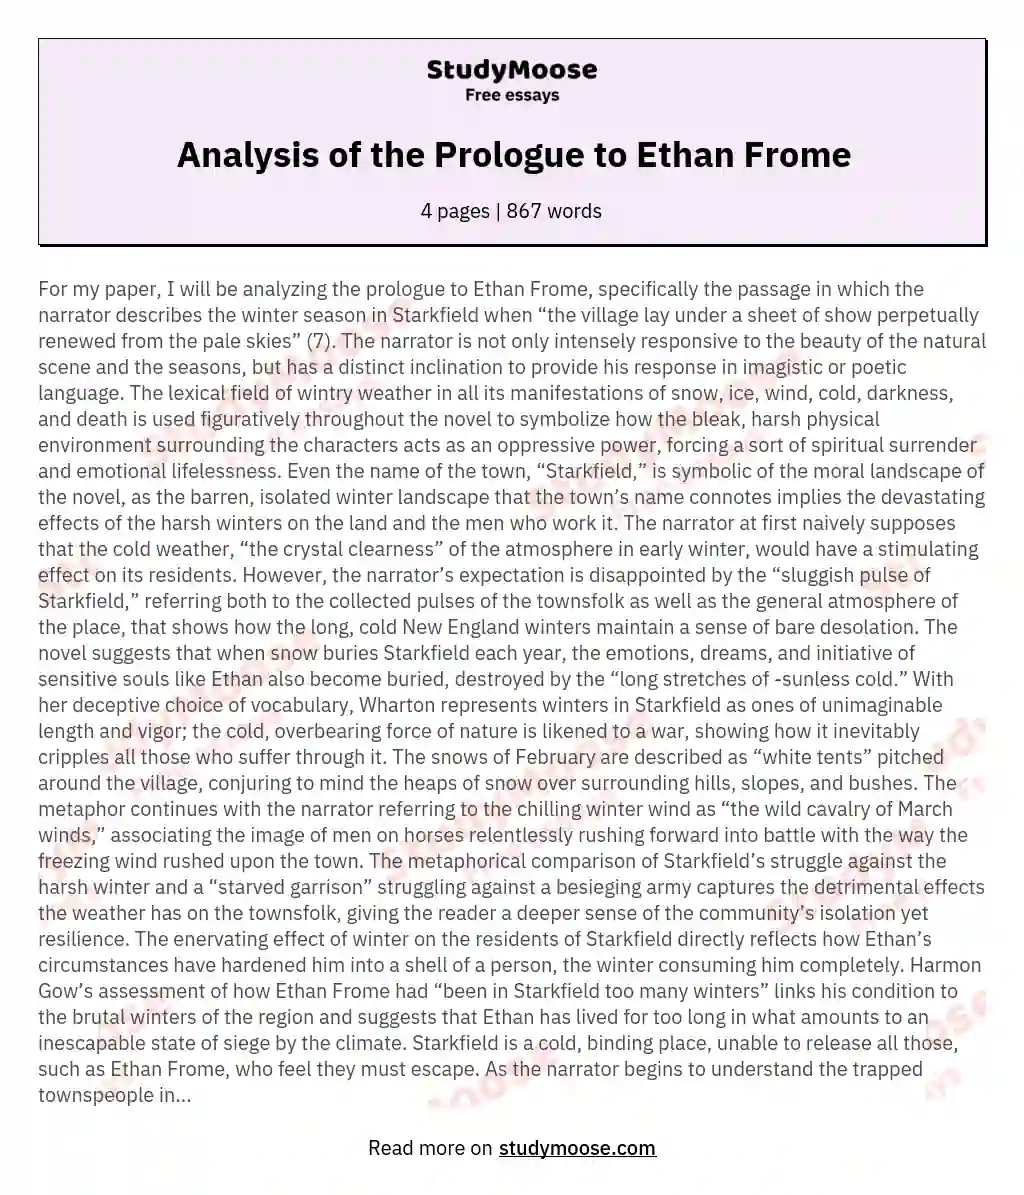 Analysis of the Prologue to Ethan Frome